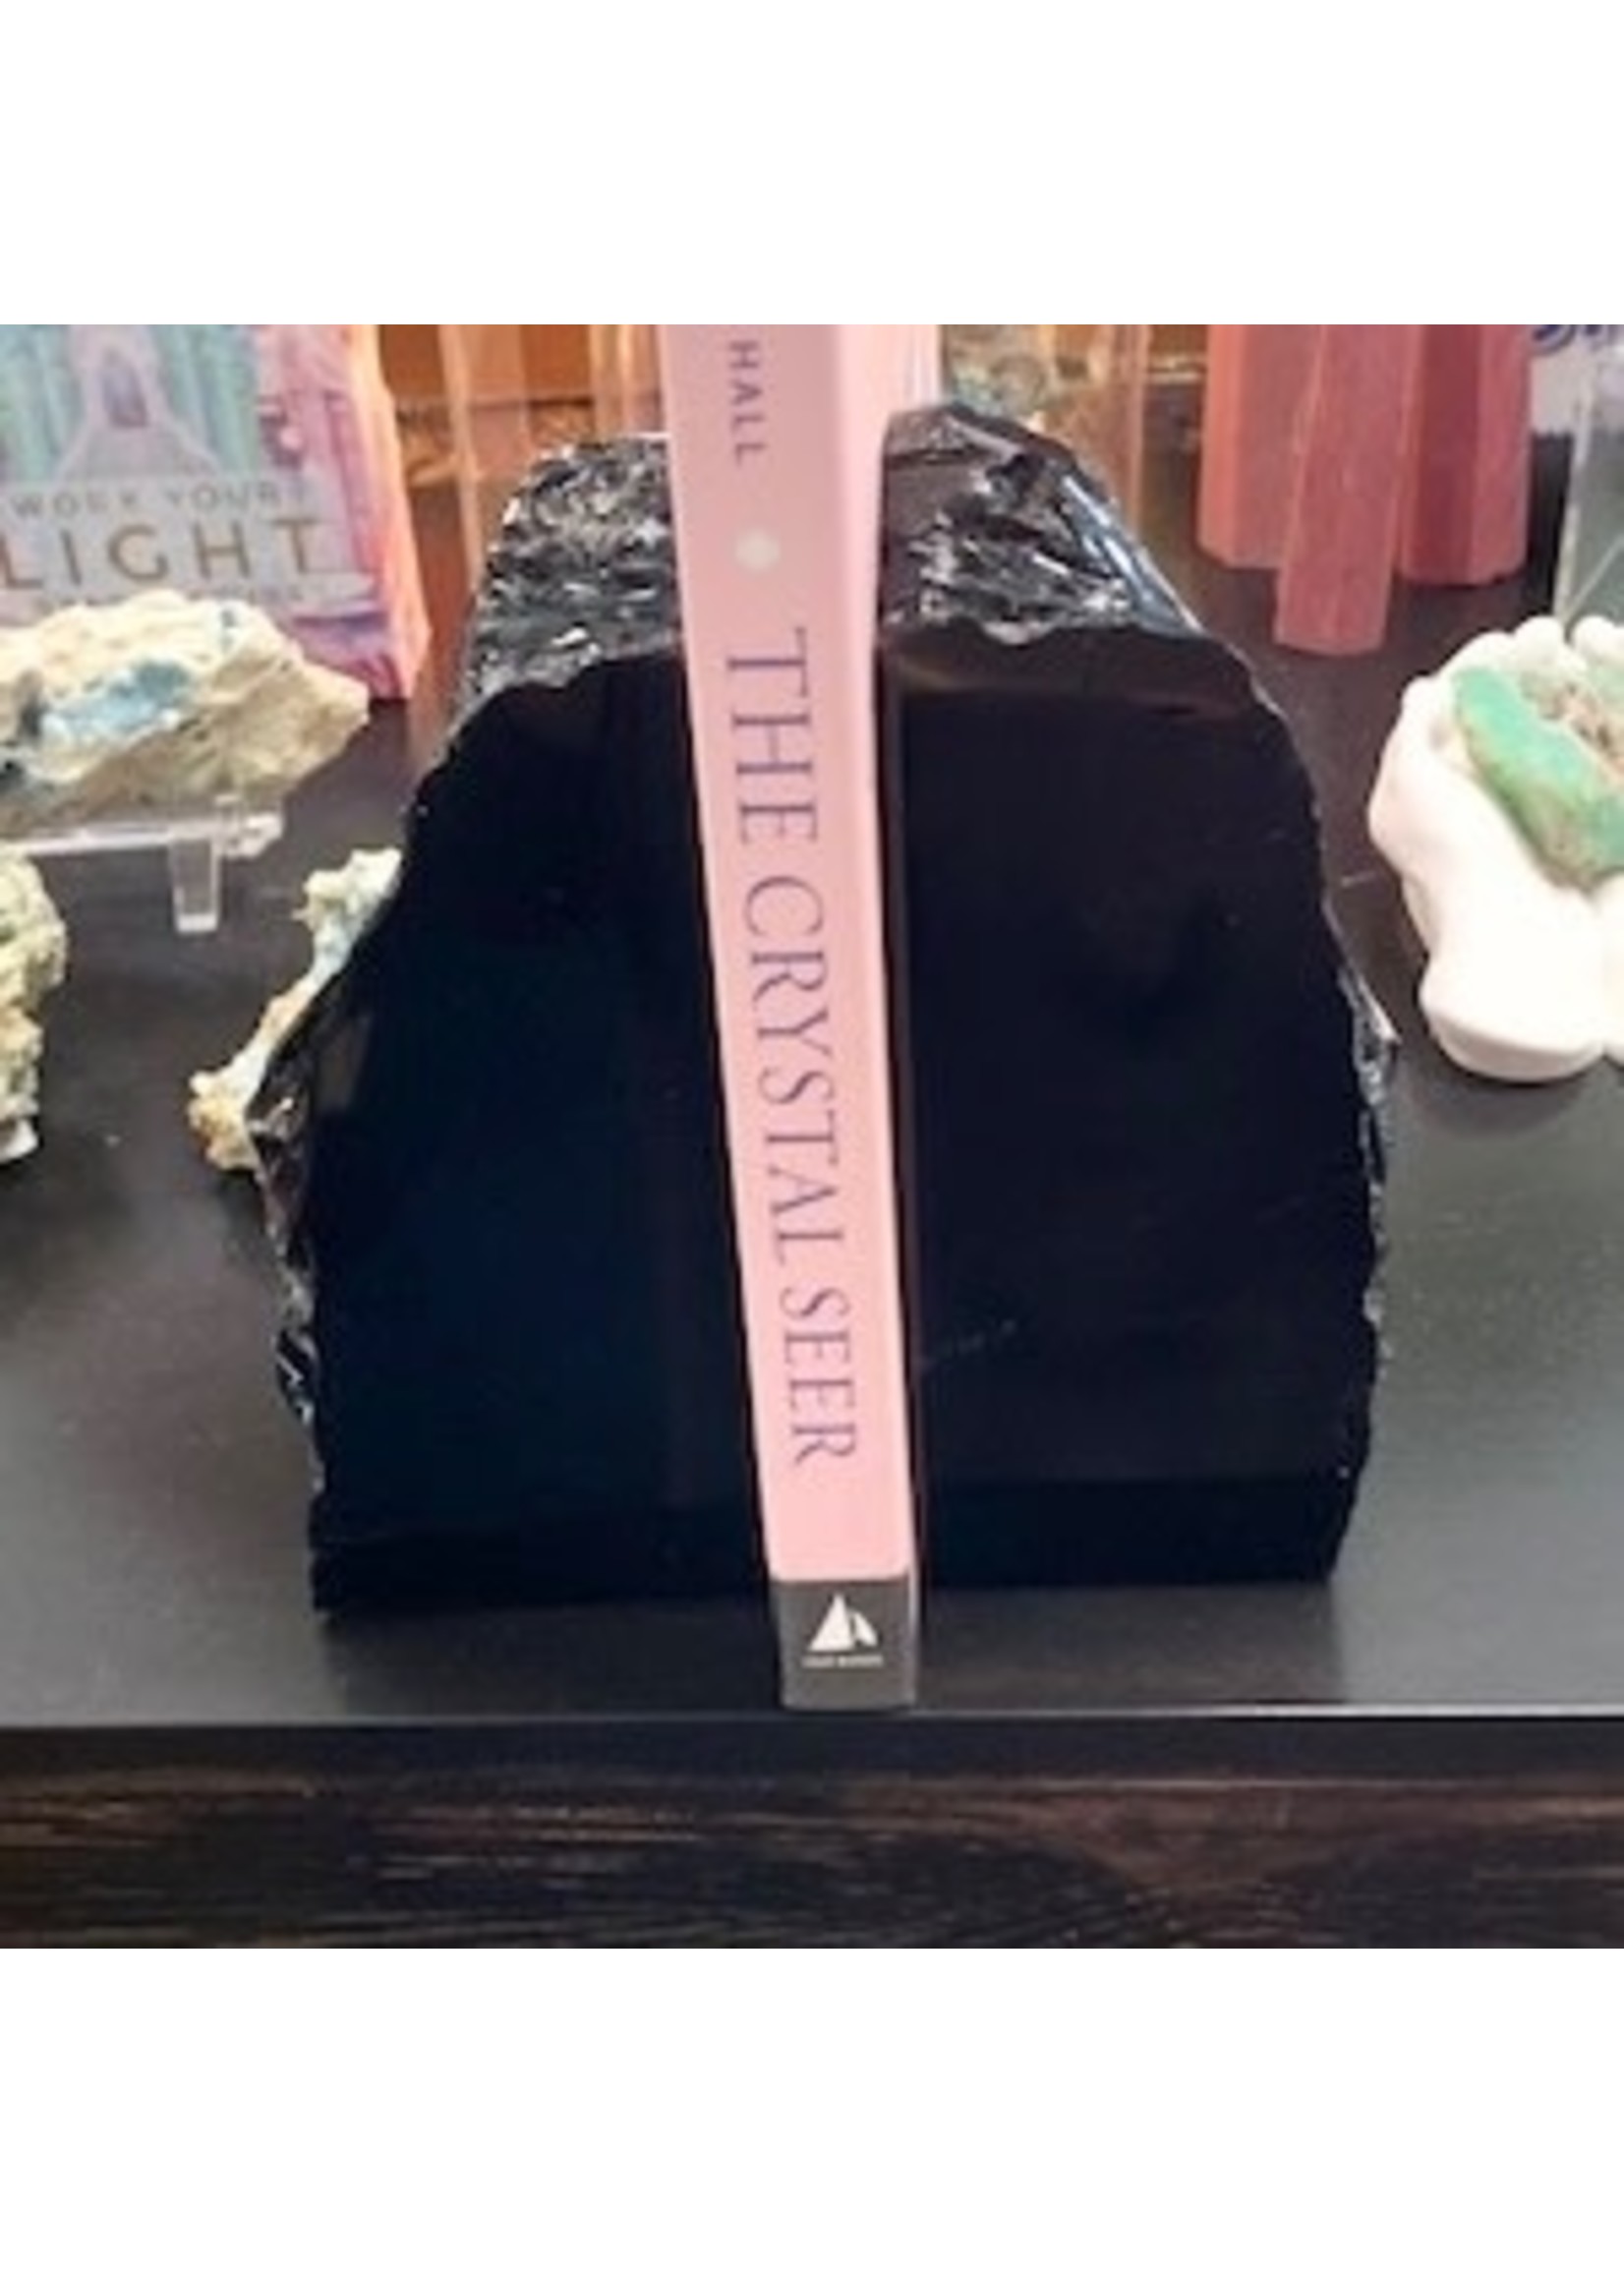 Black Obsidian Set Bookends for delving into the mysteries